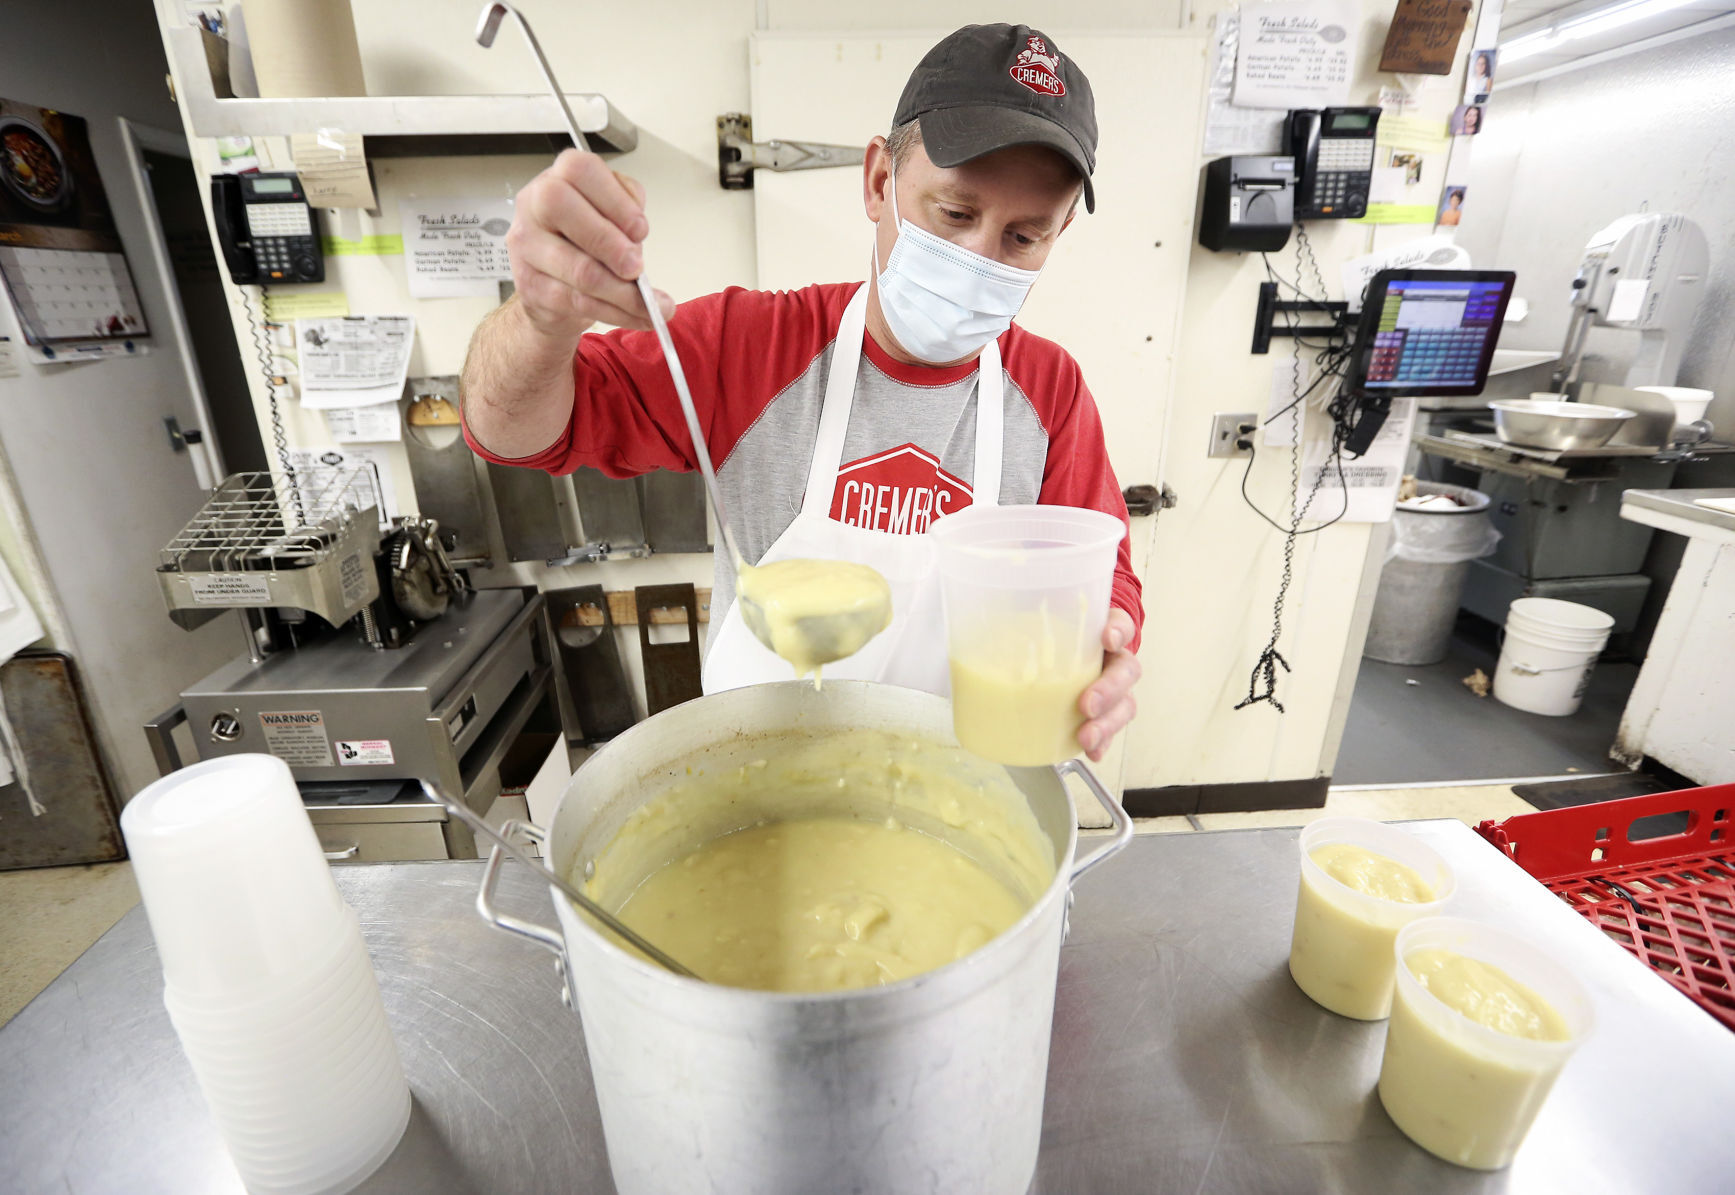 Jeff Cremer fills to-go containers of homemade turkey gravy at Cremer’s Meats in Dubuque on Monday. PHOTO CREDIT: NICKI KOHL